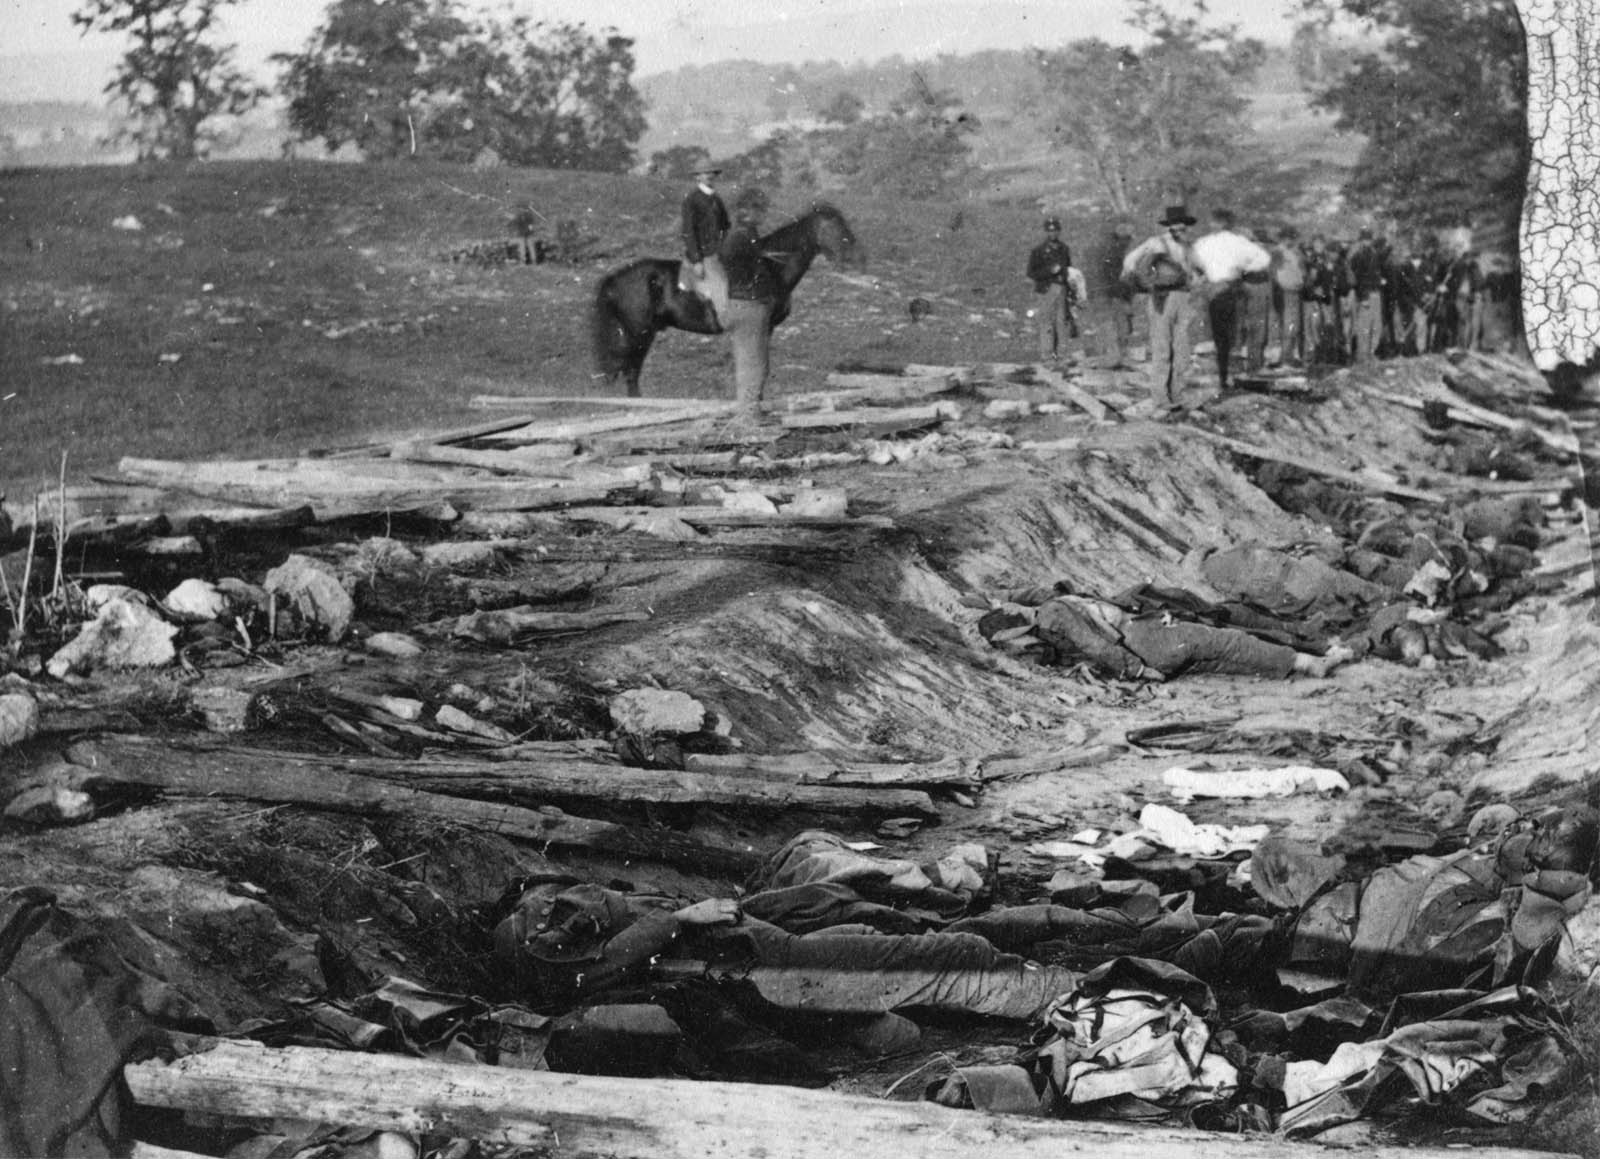 Union troops in the 130th Pennsylvania Infantry inspect piles of Confederate bodies in the all-too-descriptive “Bloody Lane” at Antietam. More than 4,800 soldiers in the two armies were killed in the one-day battle, the bloodiest single day in American history.